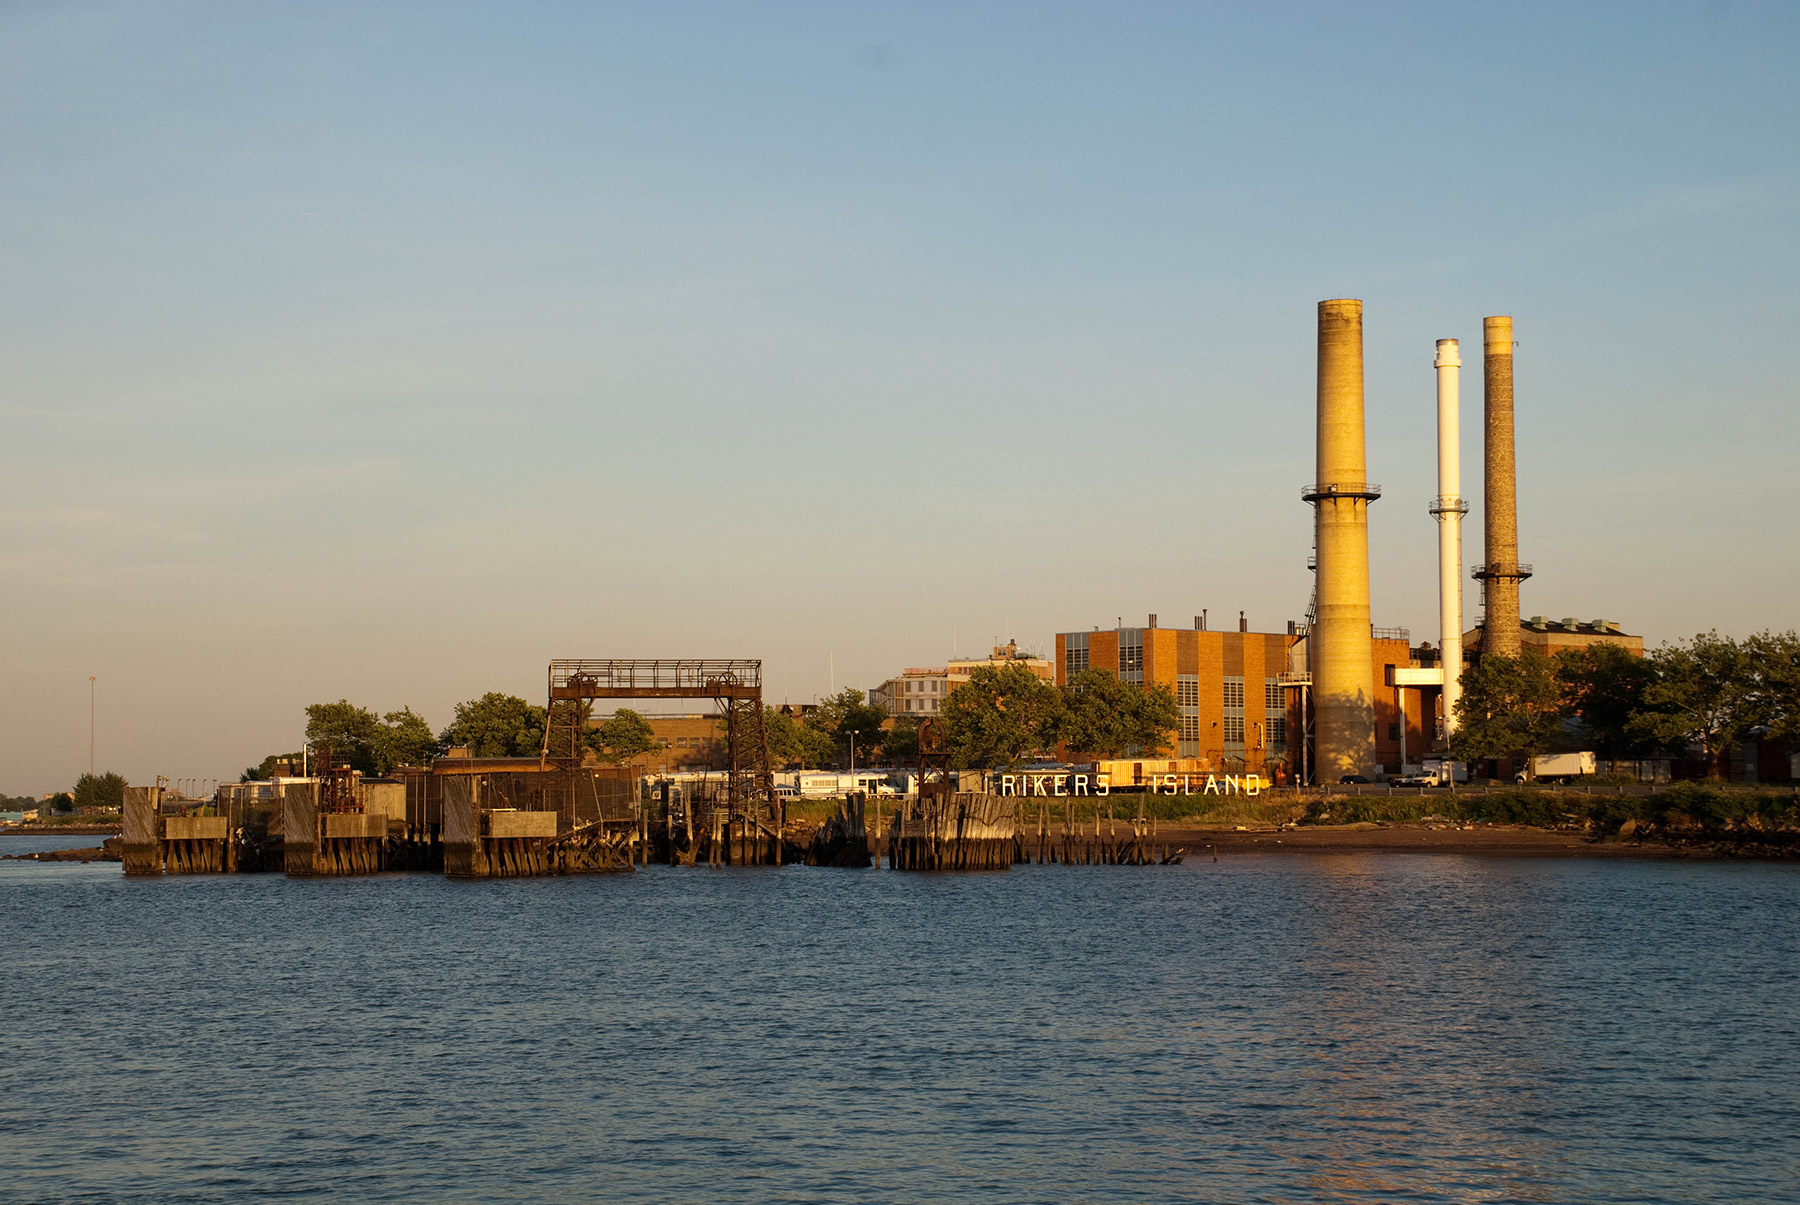 The power plant on Rikers Island